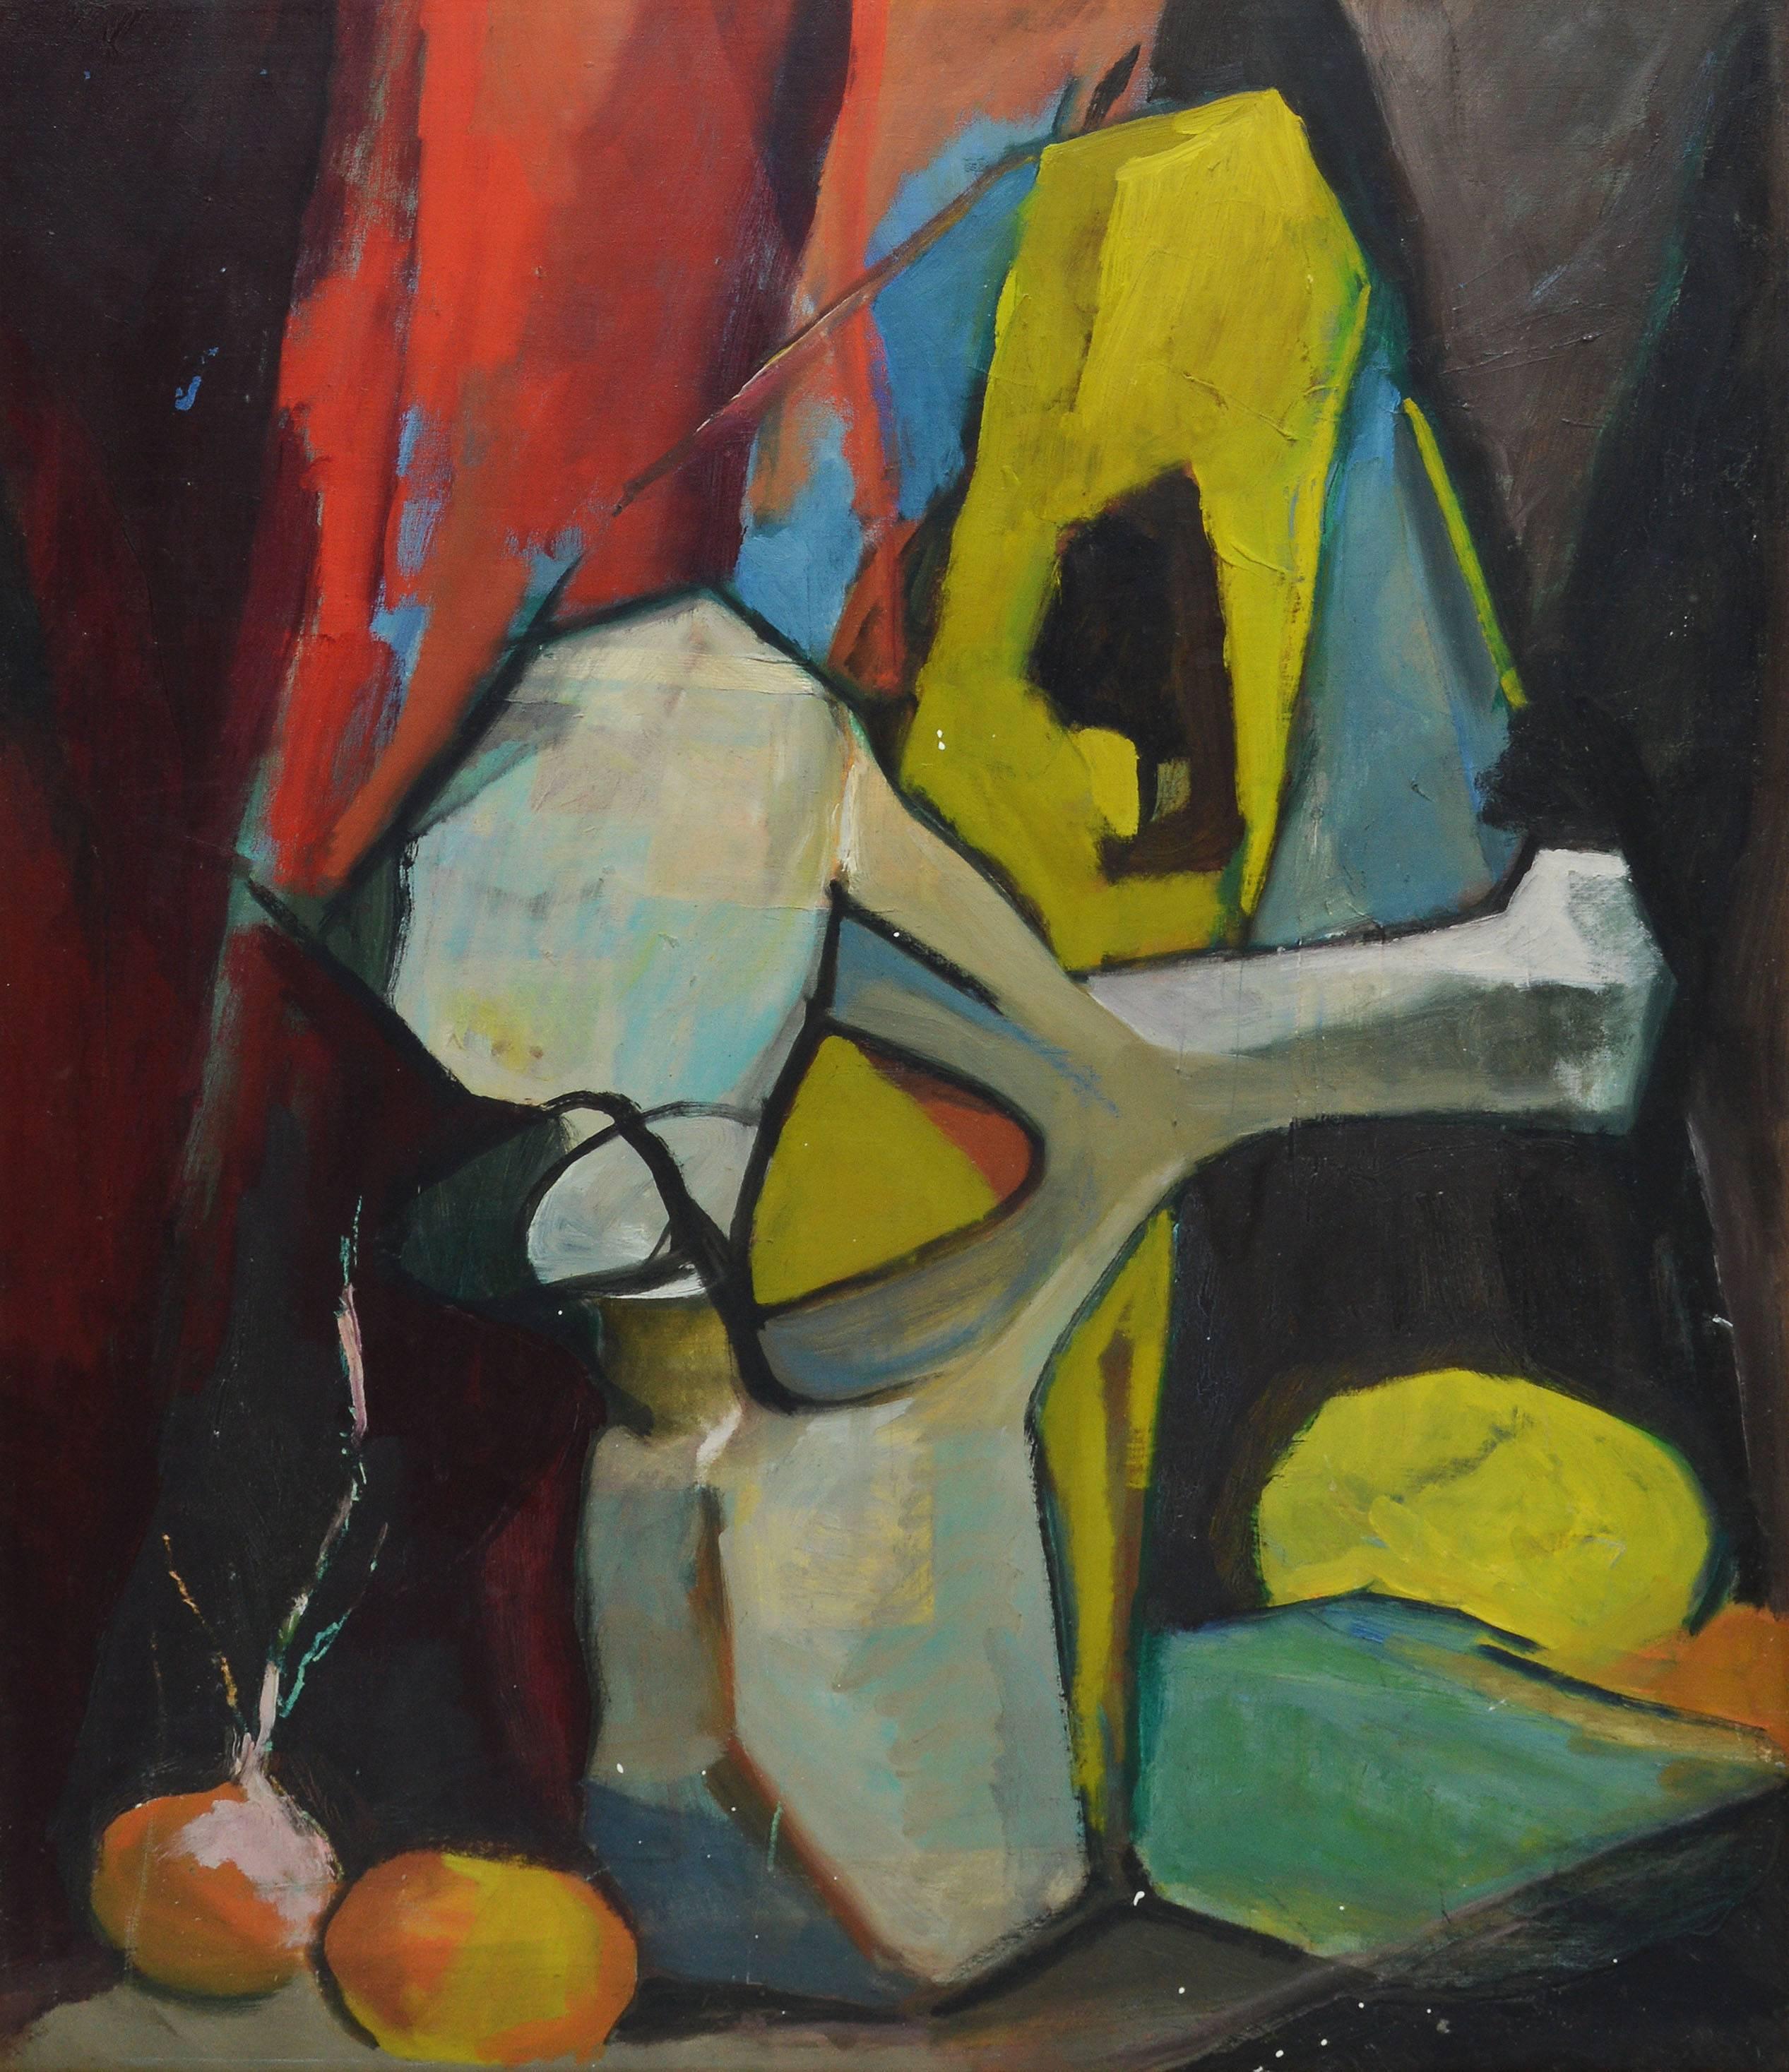 Early American Modernist Still Life - Abstract Painting by Unknown